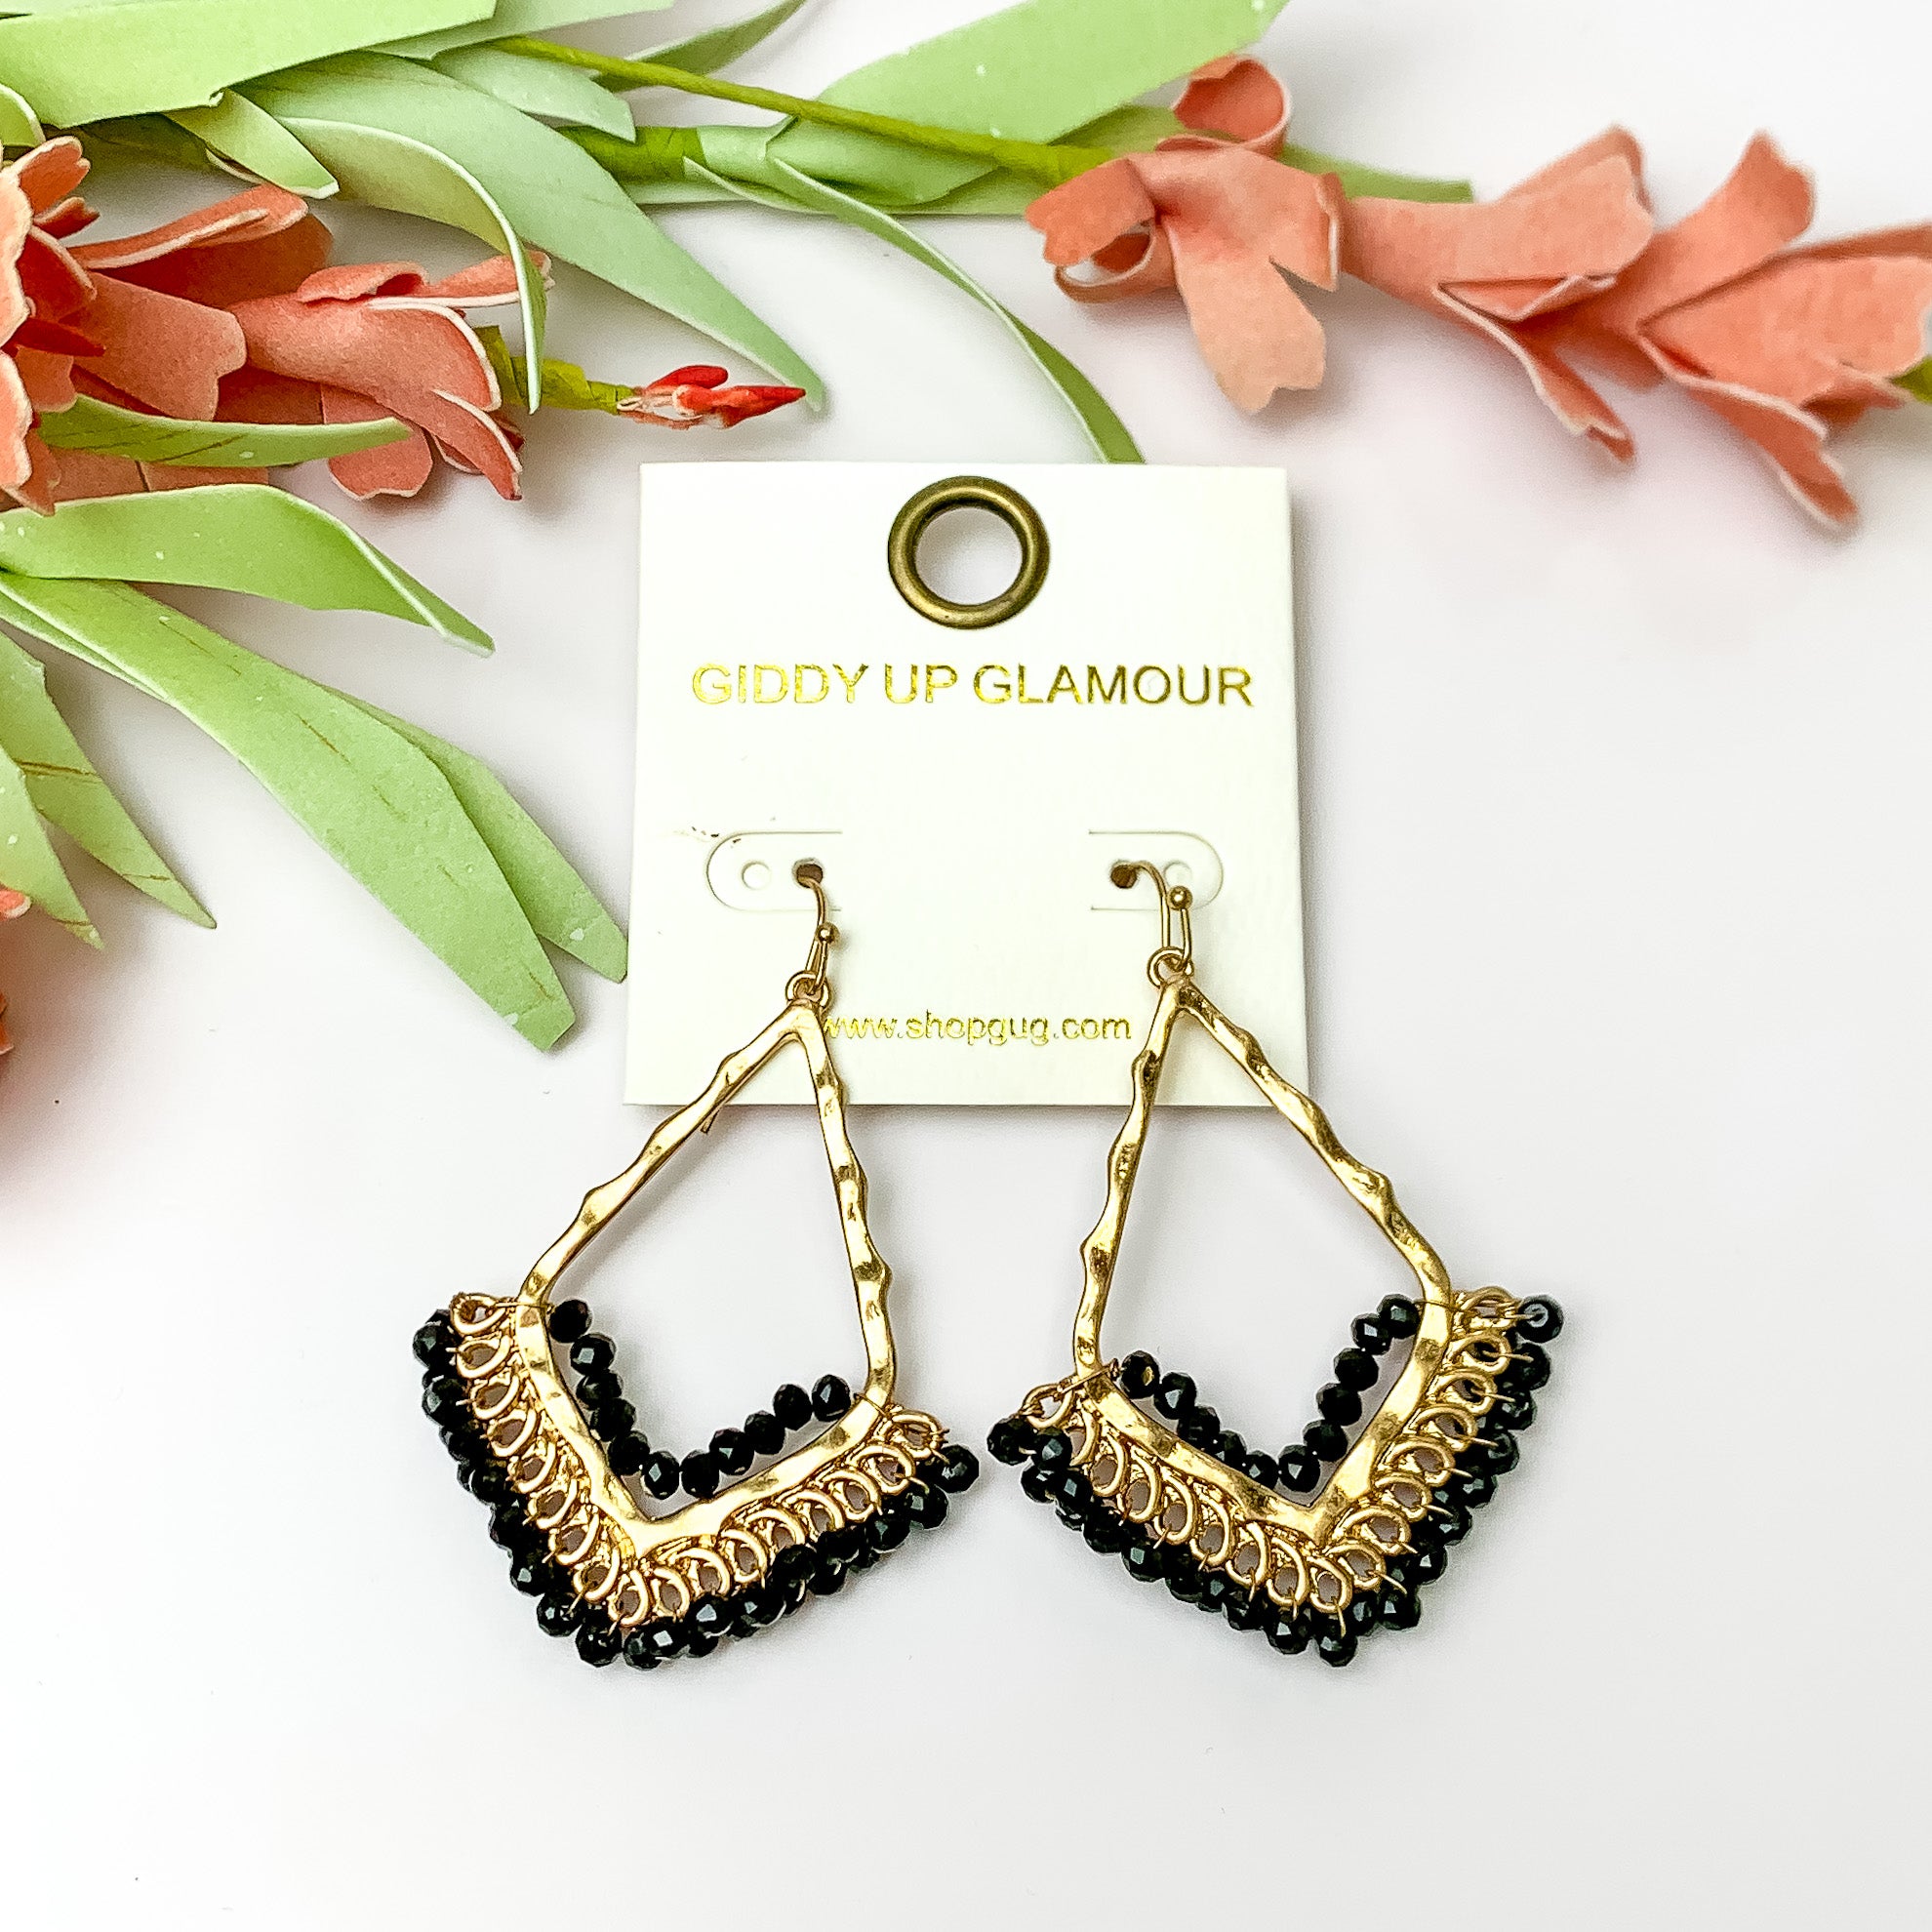 Black crystal beads bordering open drop gold tone earrings. Pictured on a white background with flowers on top.